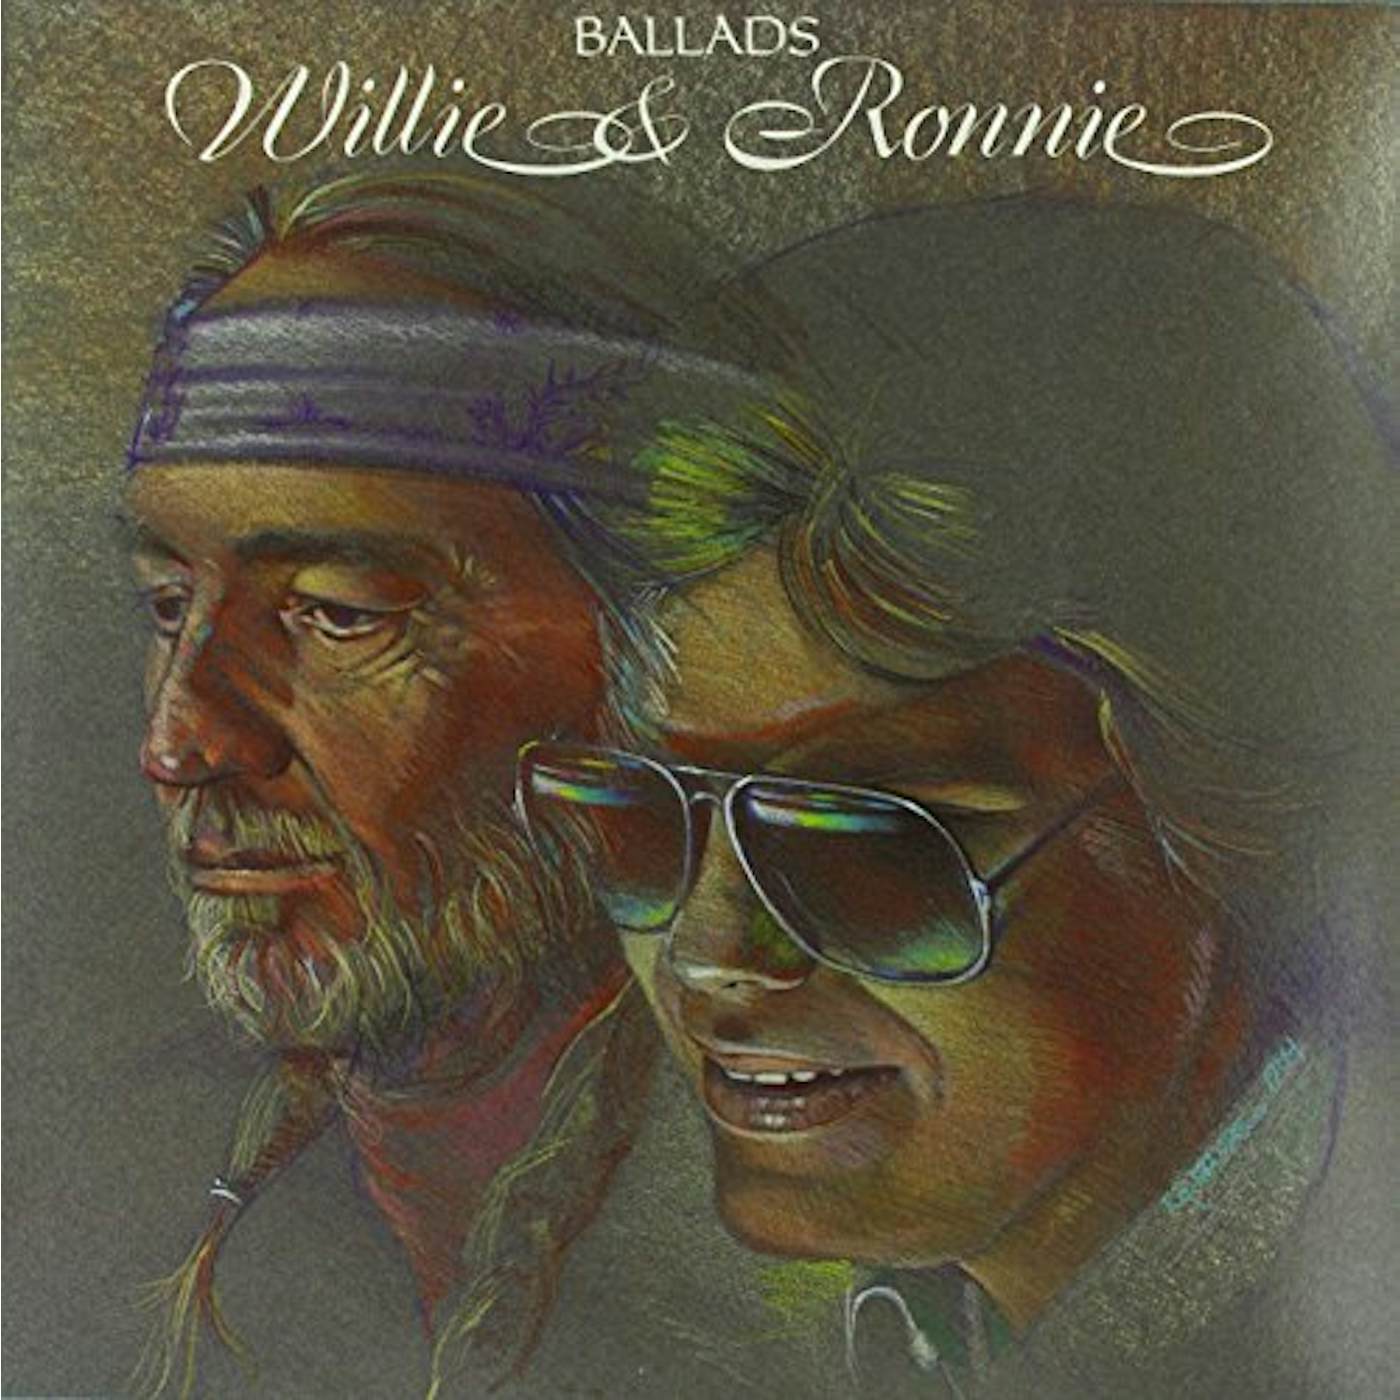 Willie Nelson / Ronnie Milsap BALLADS: WILLIE & RONNIE (BACK TO BACK) Vinyl Record